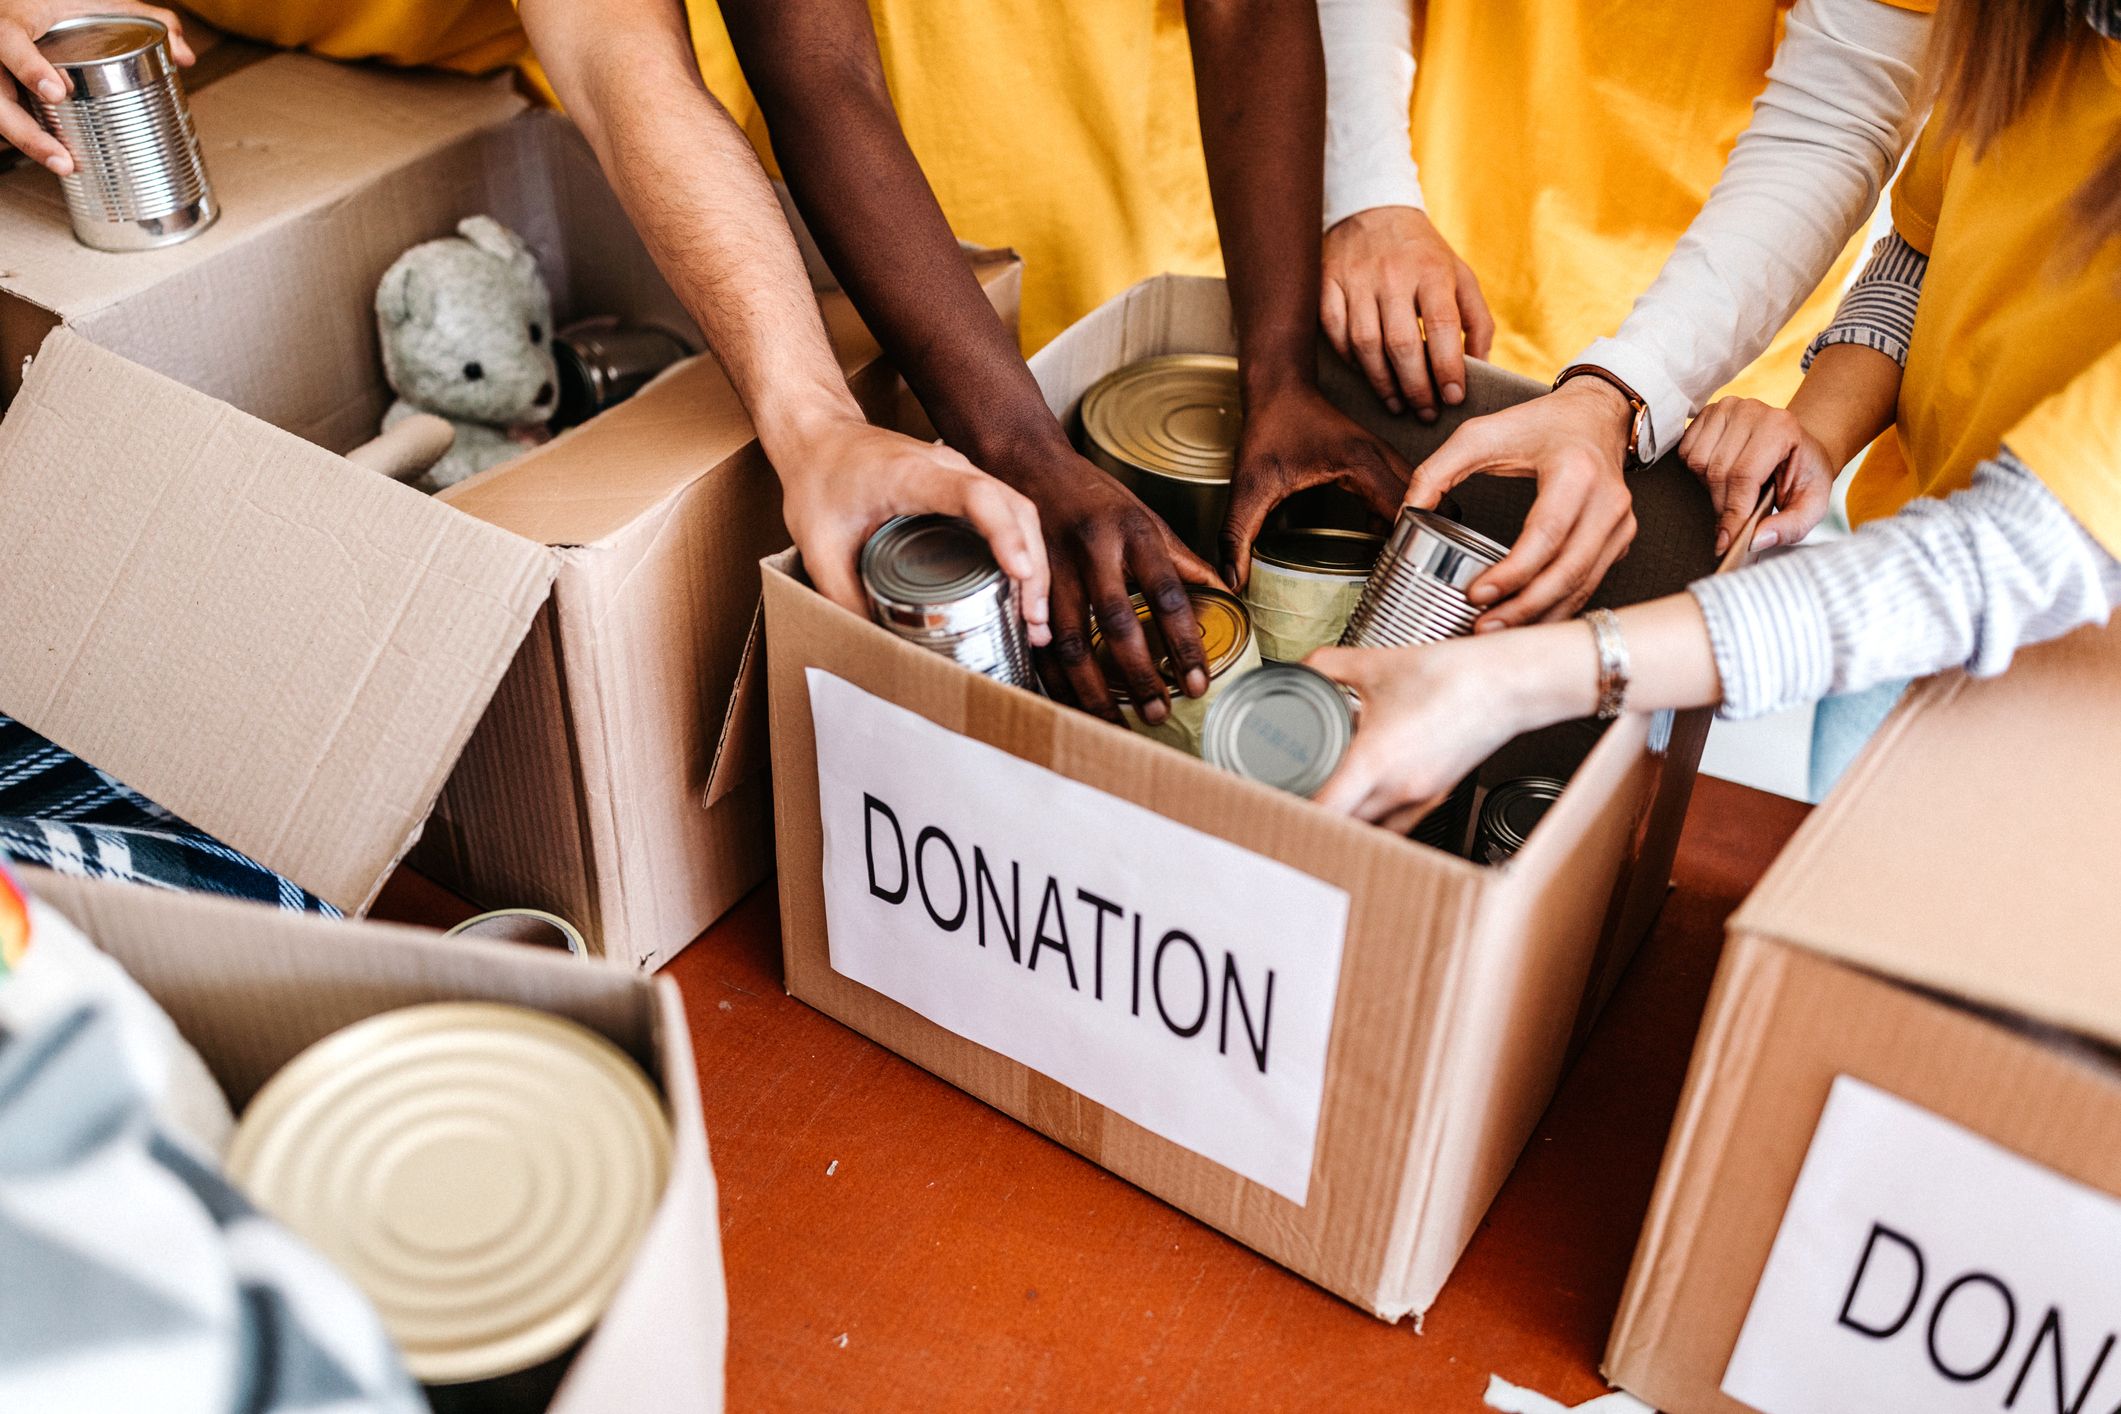 10+ Things You Should Never Donate To A Food Bank